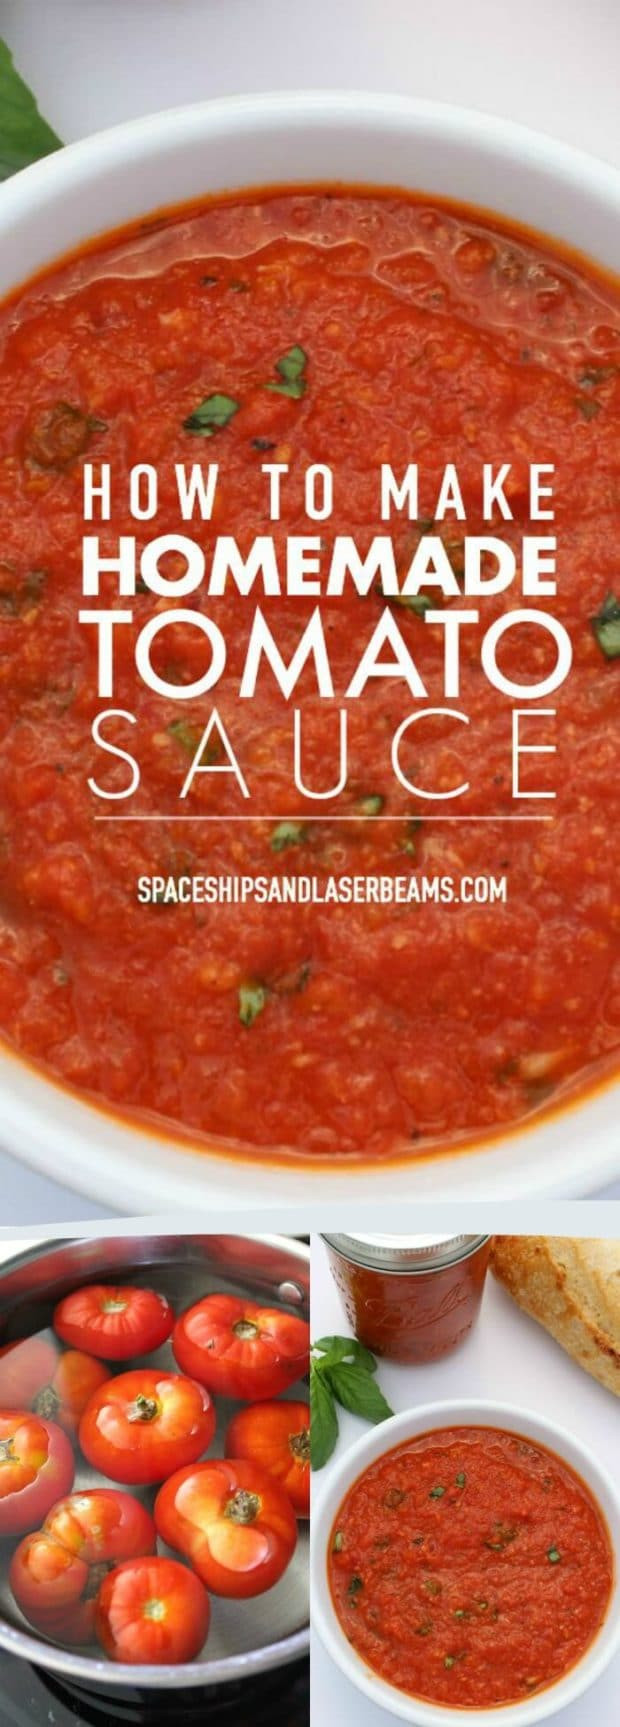 Homemade Spaghetti Sauce With Fresh Tomatoes For Canning
 How to Make Homemade Tomato Sauce Spaceships and Laser Beams